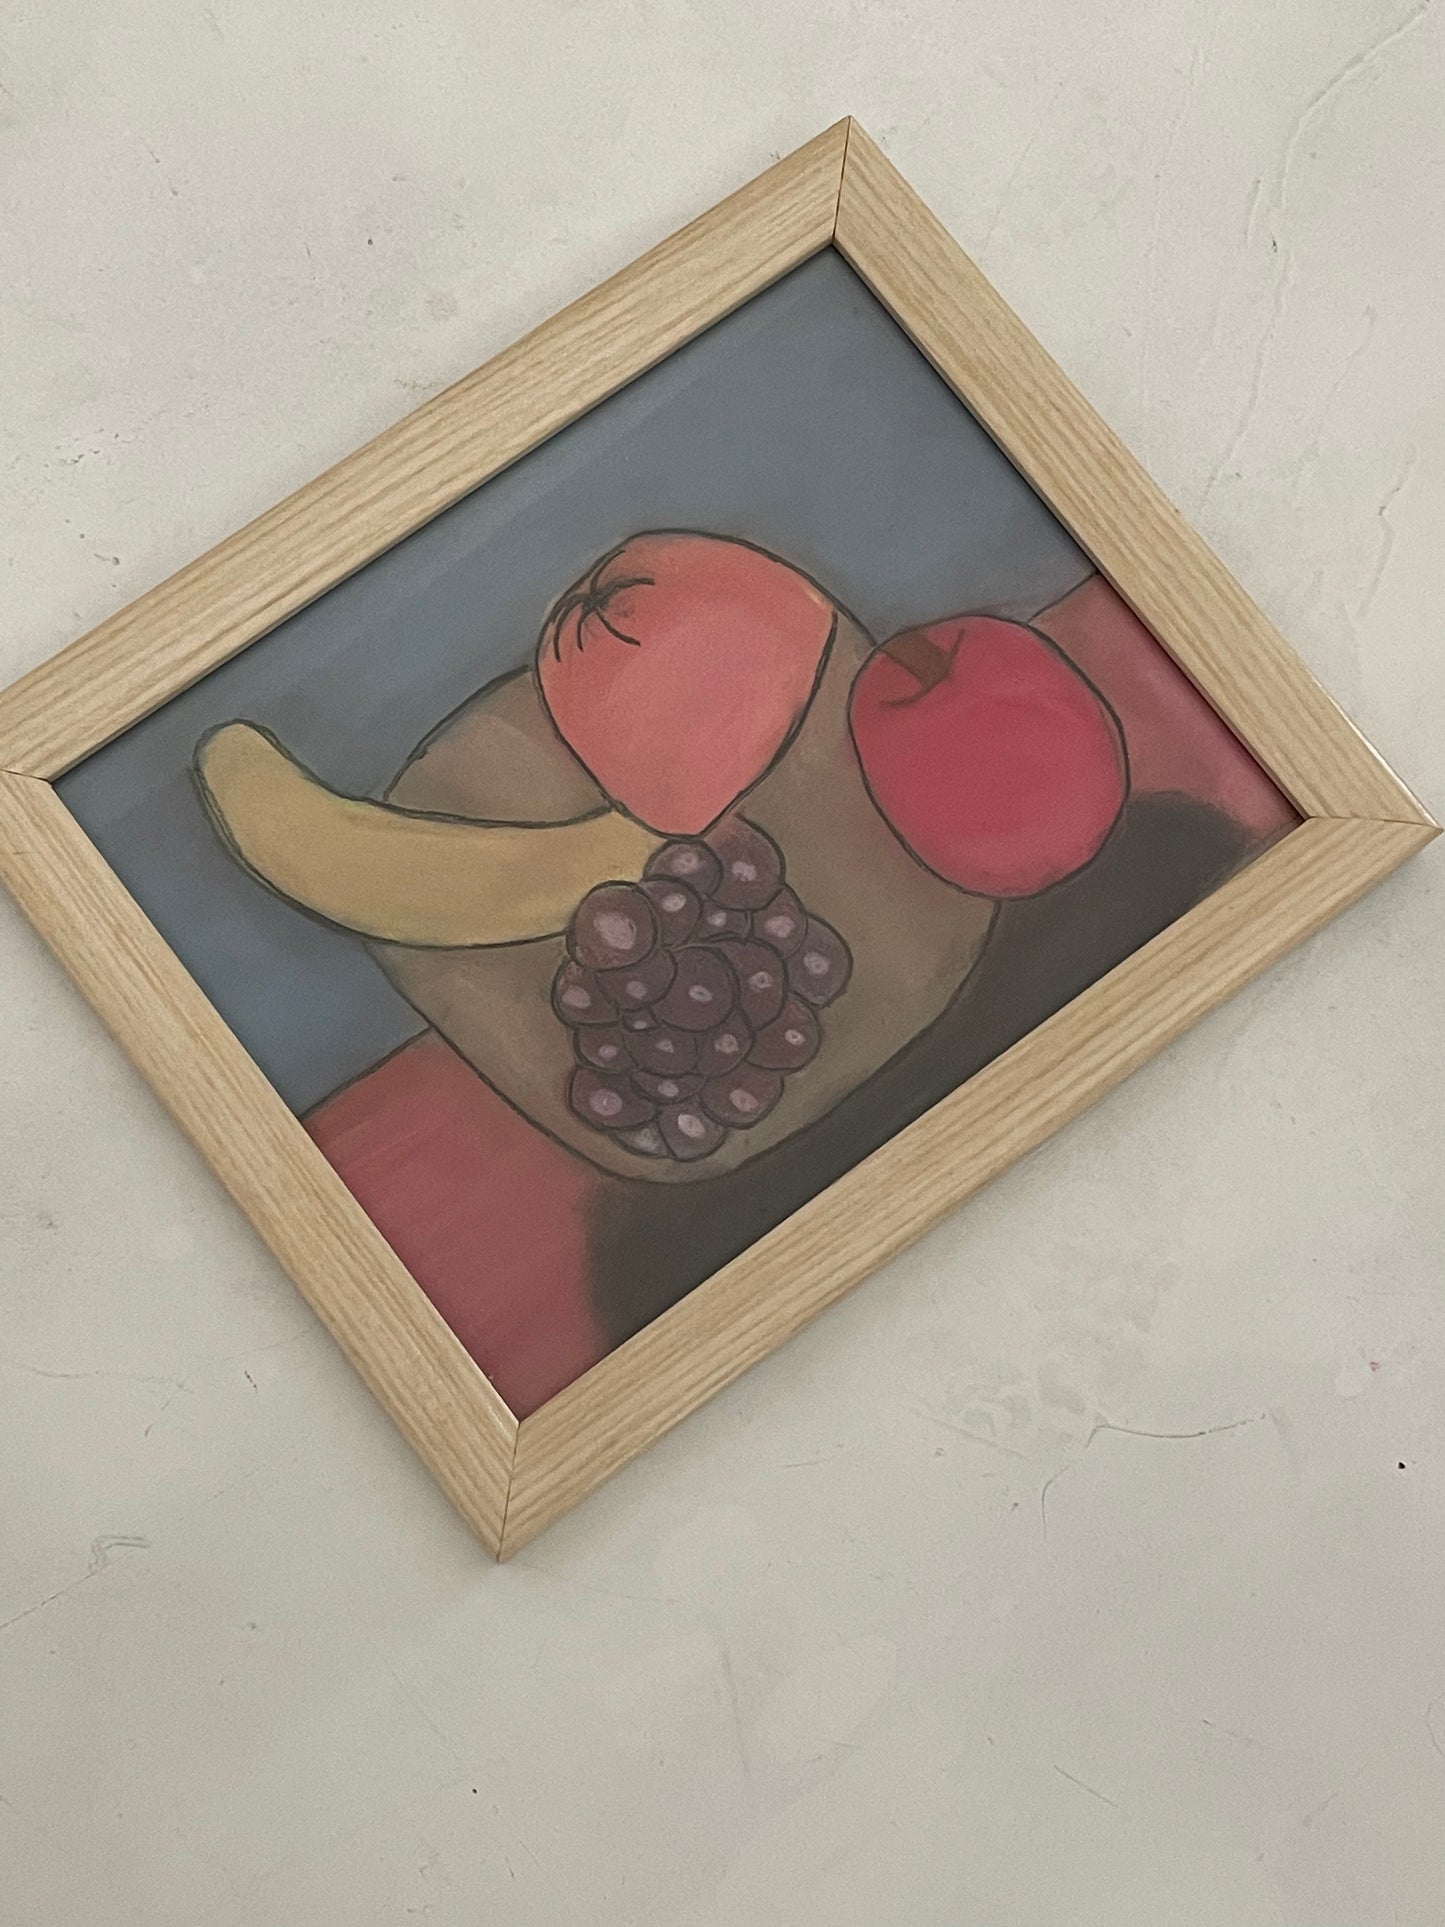 Playful & Imperfect Fruit Still Life With Chalk  Art